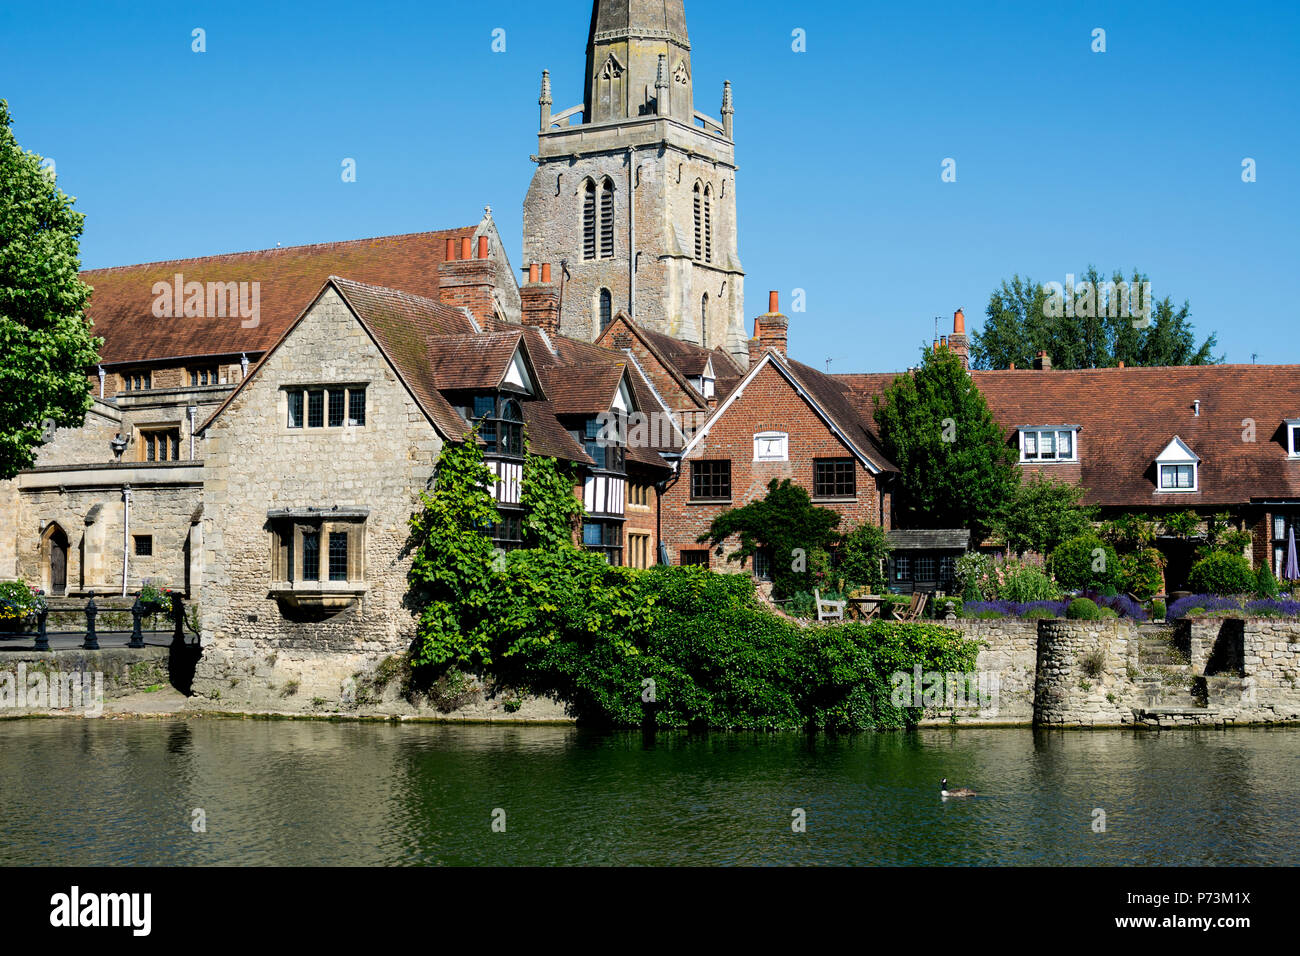 View across River Thames towards St. Helen`s Church, Abingdon-on-Thames, Oxfordshire, England, UK Stock Photo